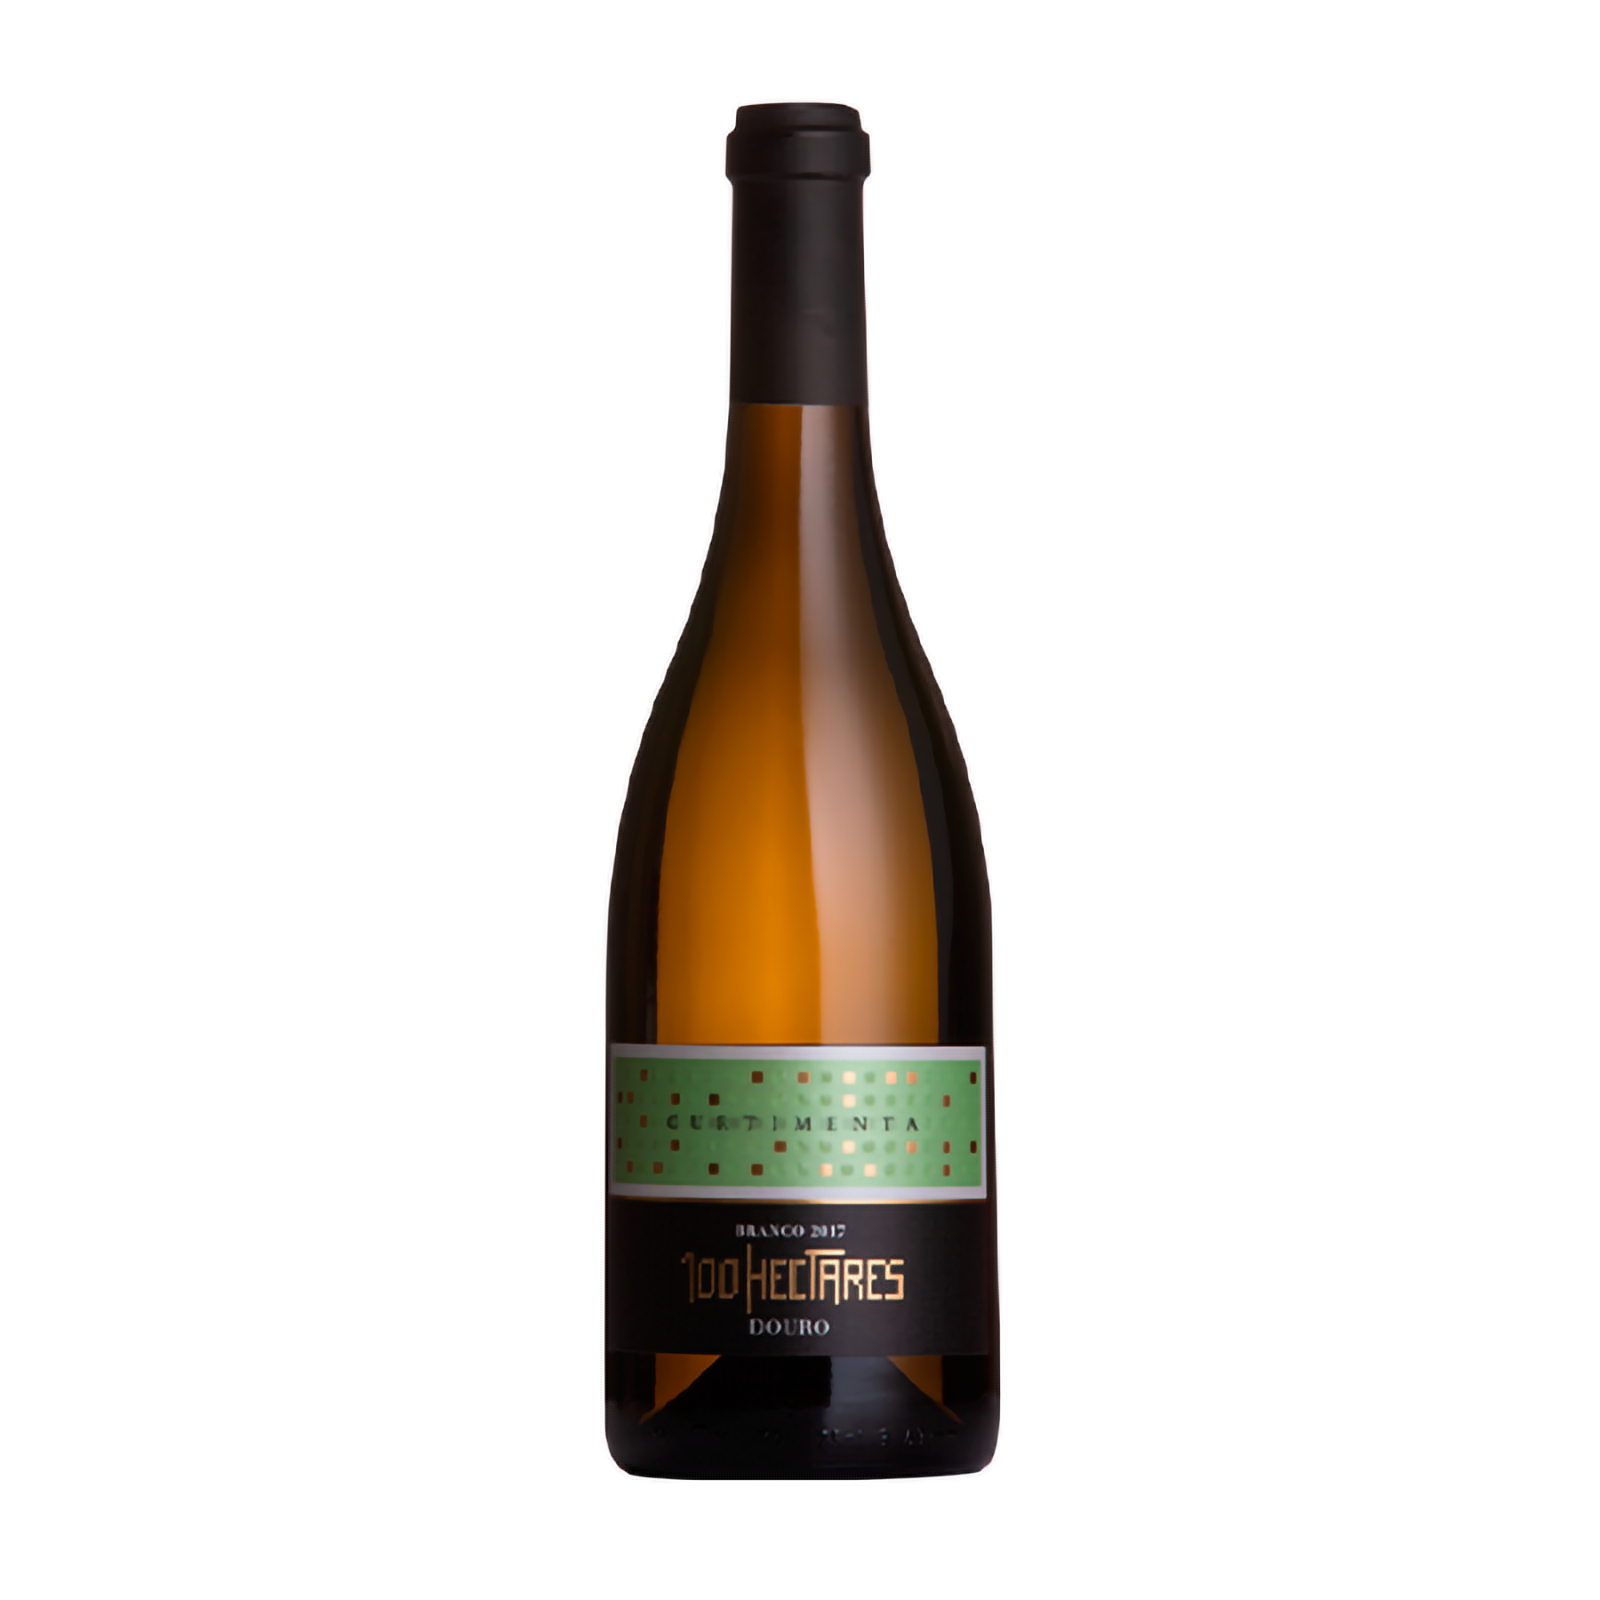 100 Hectares Curtimenta Bianco 2018